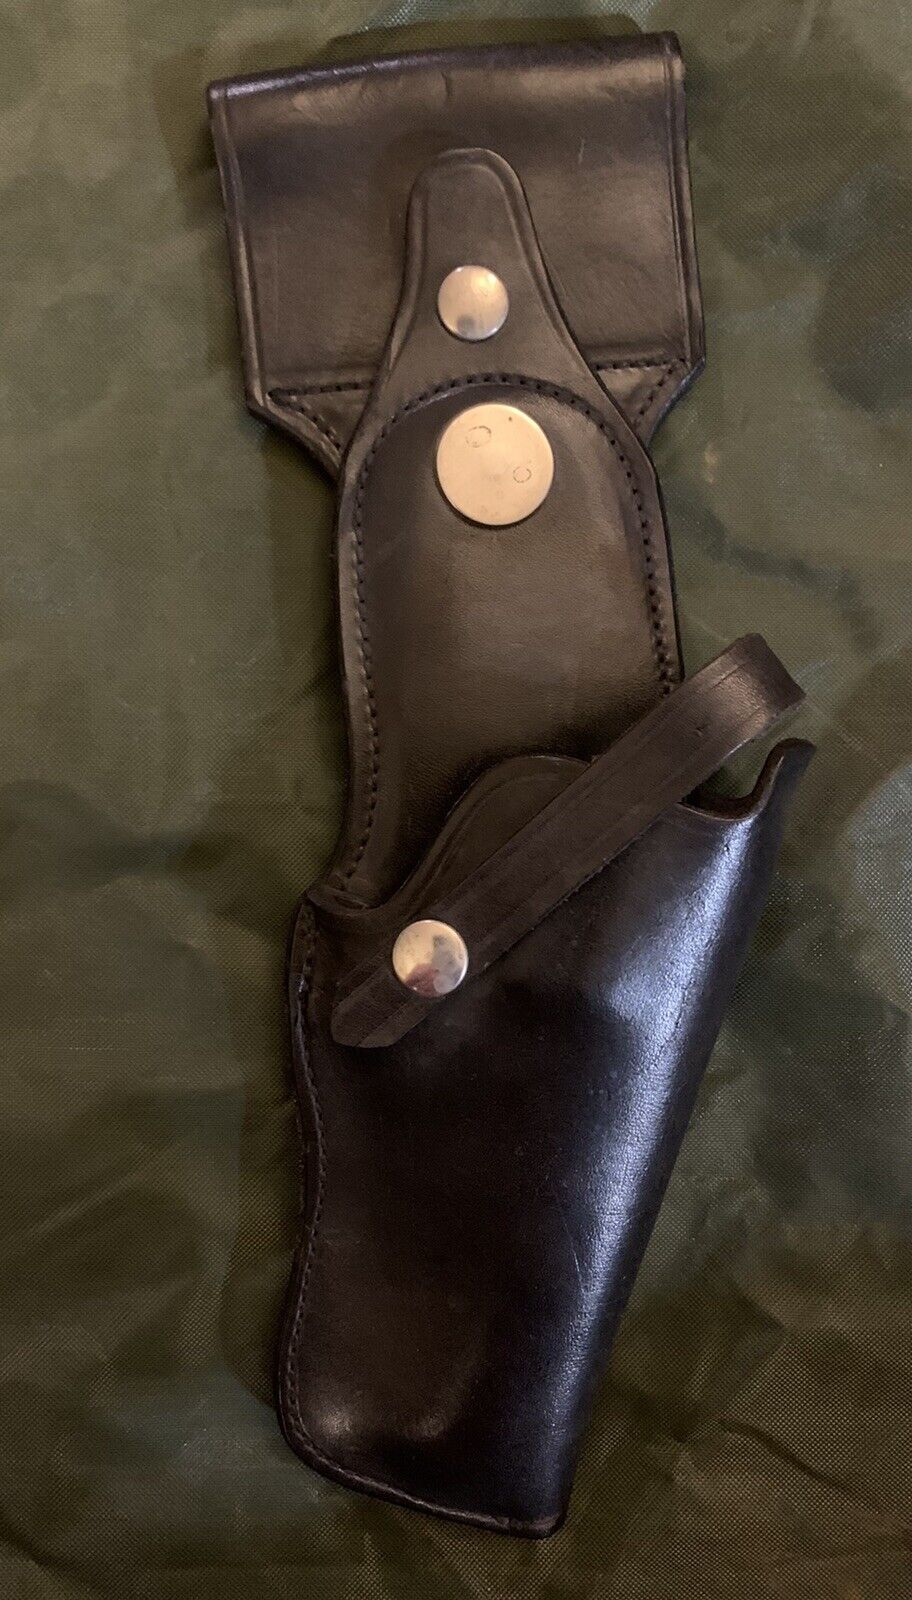 Vintage Smith and Wesson B16 34 Duty Pistol Revolver Holster blk leather police